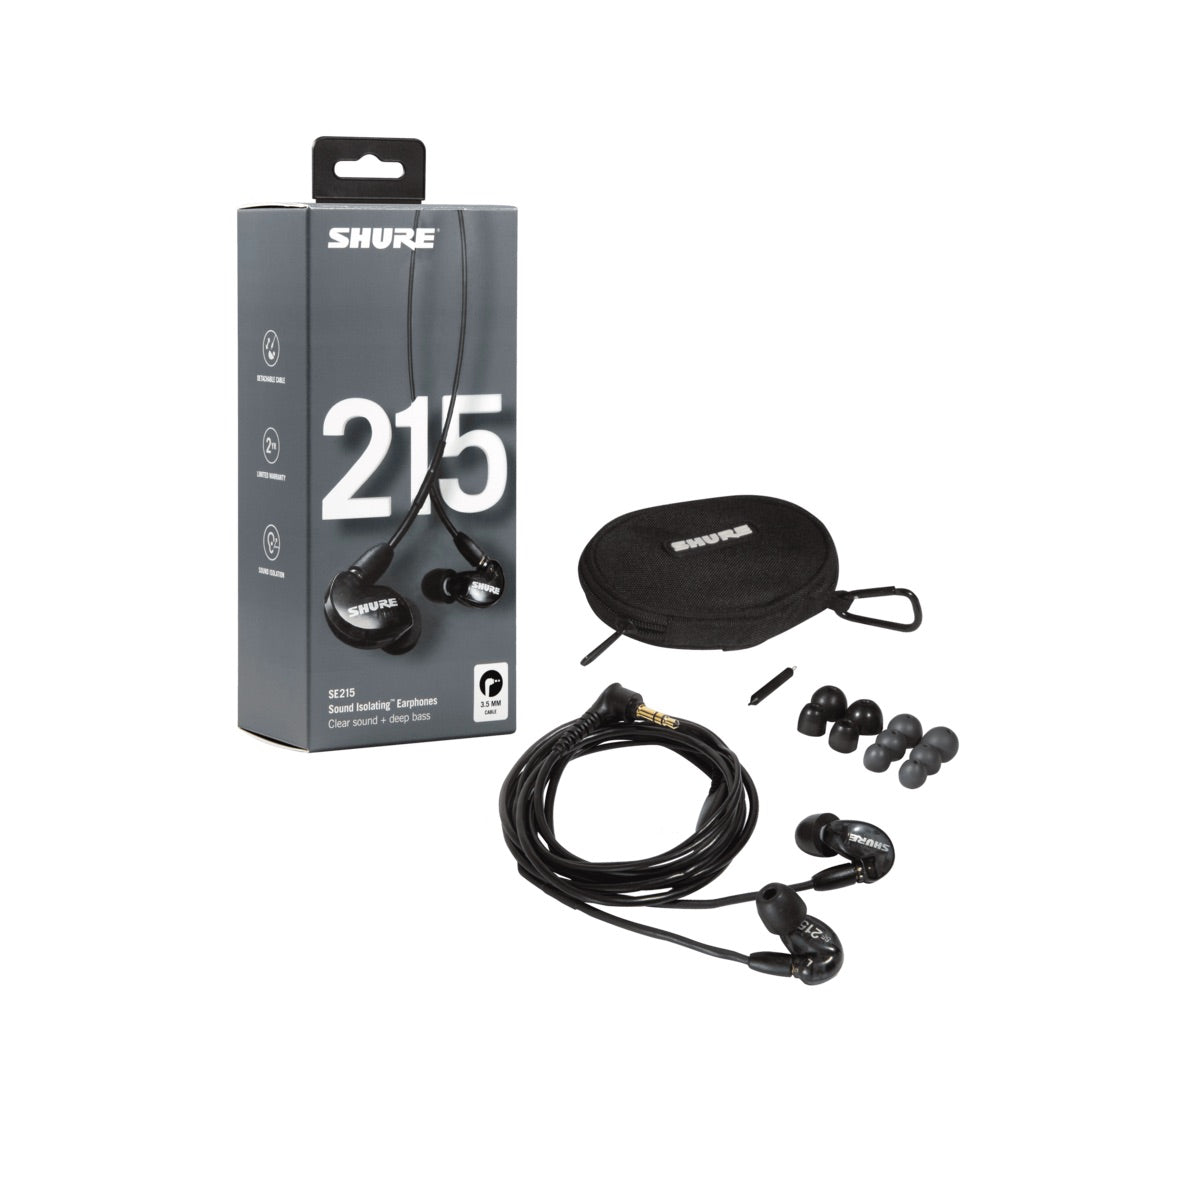 Shure SE215 Special Edition Sound Isolating Earphones